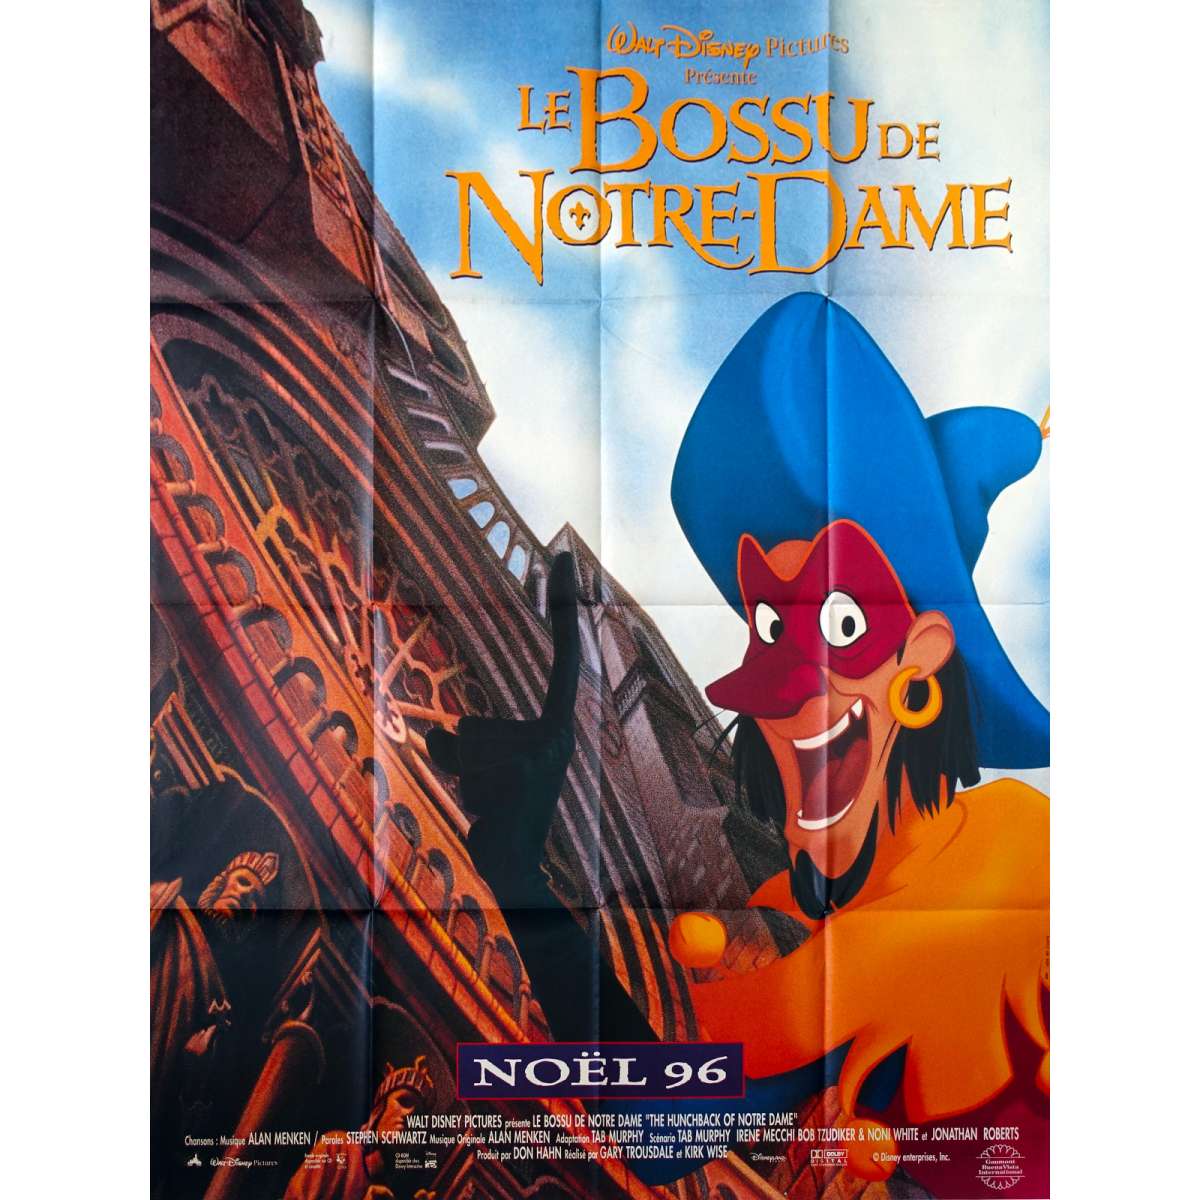 HUNCHBACK OF NOTRE DAME Movie Poster 47x63 in.